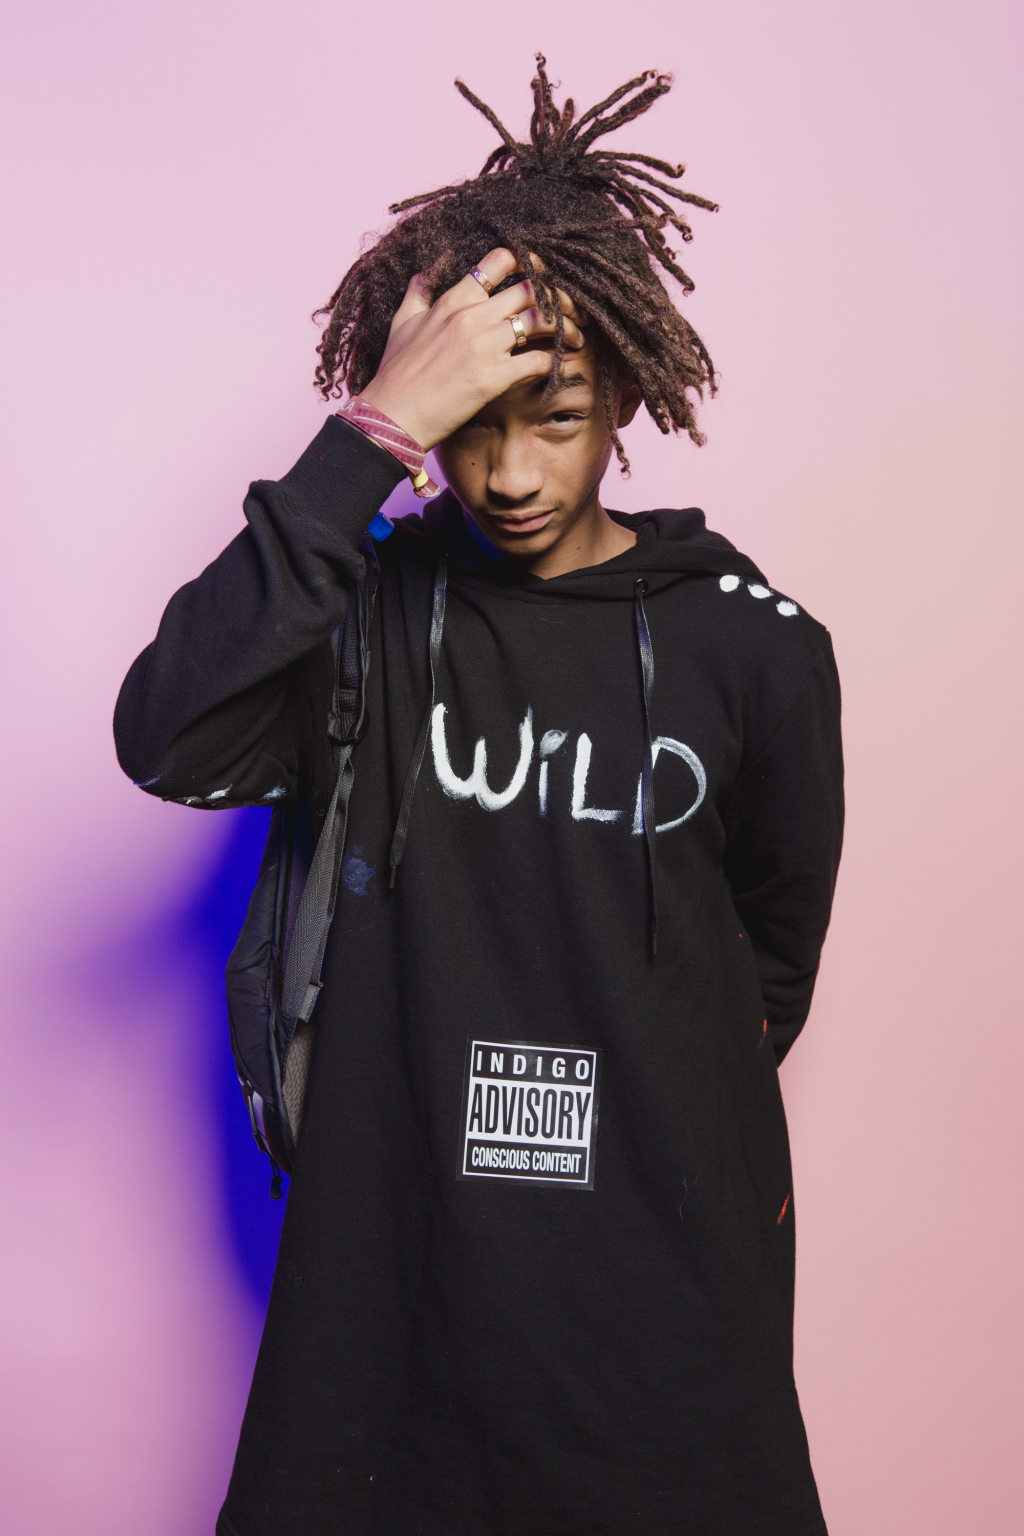 BROOKLYN, NY - OCTOBER 24:  Jaden Smith poses for a poratrit backstage at  Day 2 of the Fader Fort presented by Converse at Converse Rubber Tracks Studio on October 24, 2014 in Brooklyn City.  (Photo by Roger Kisby/Getty Images)